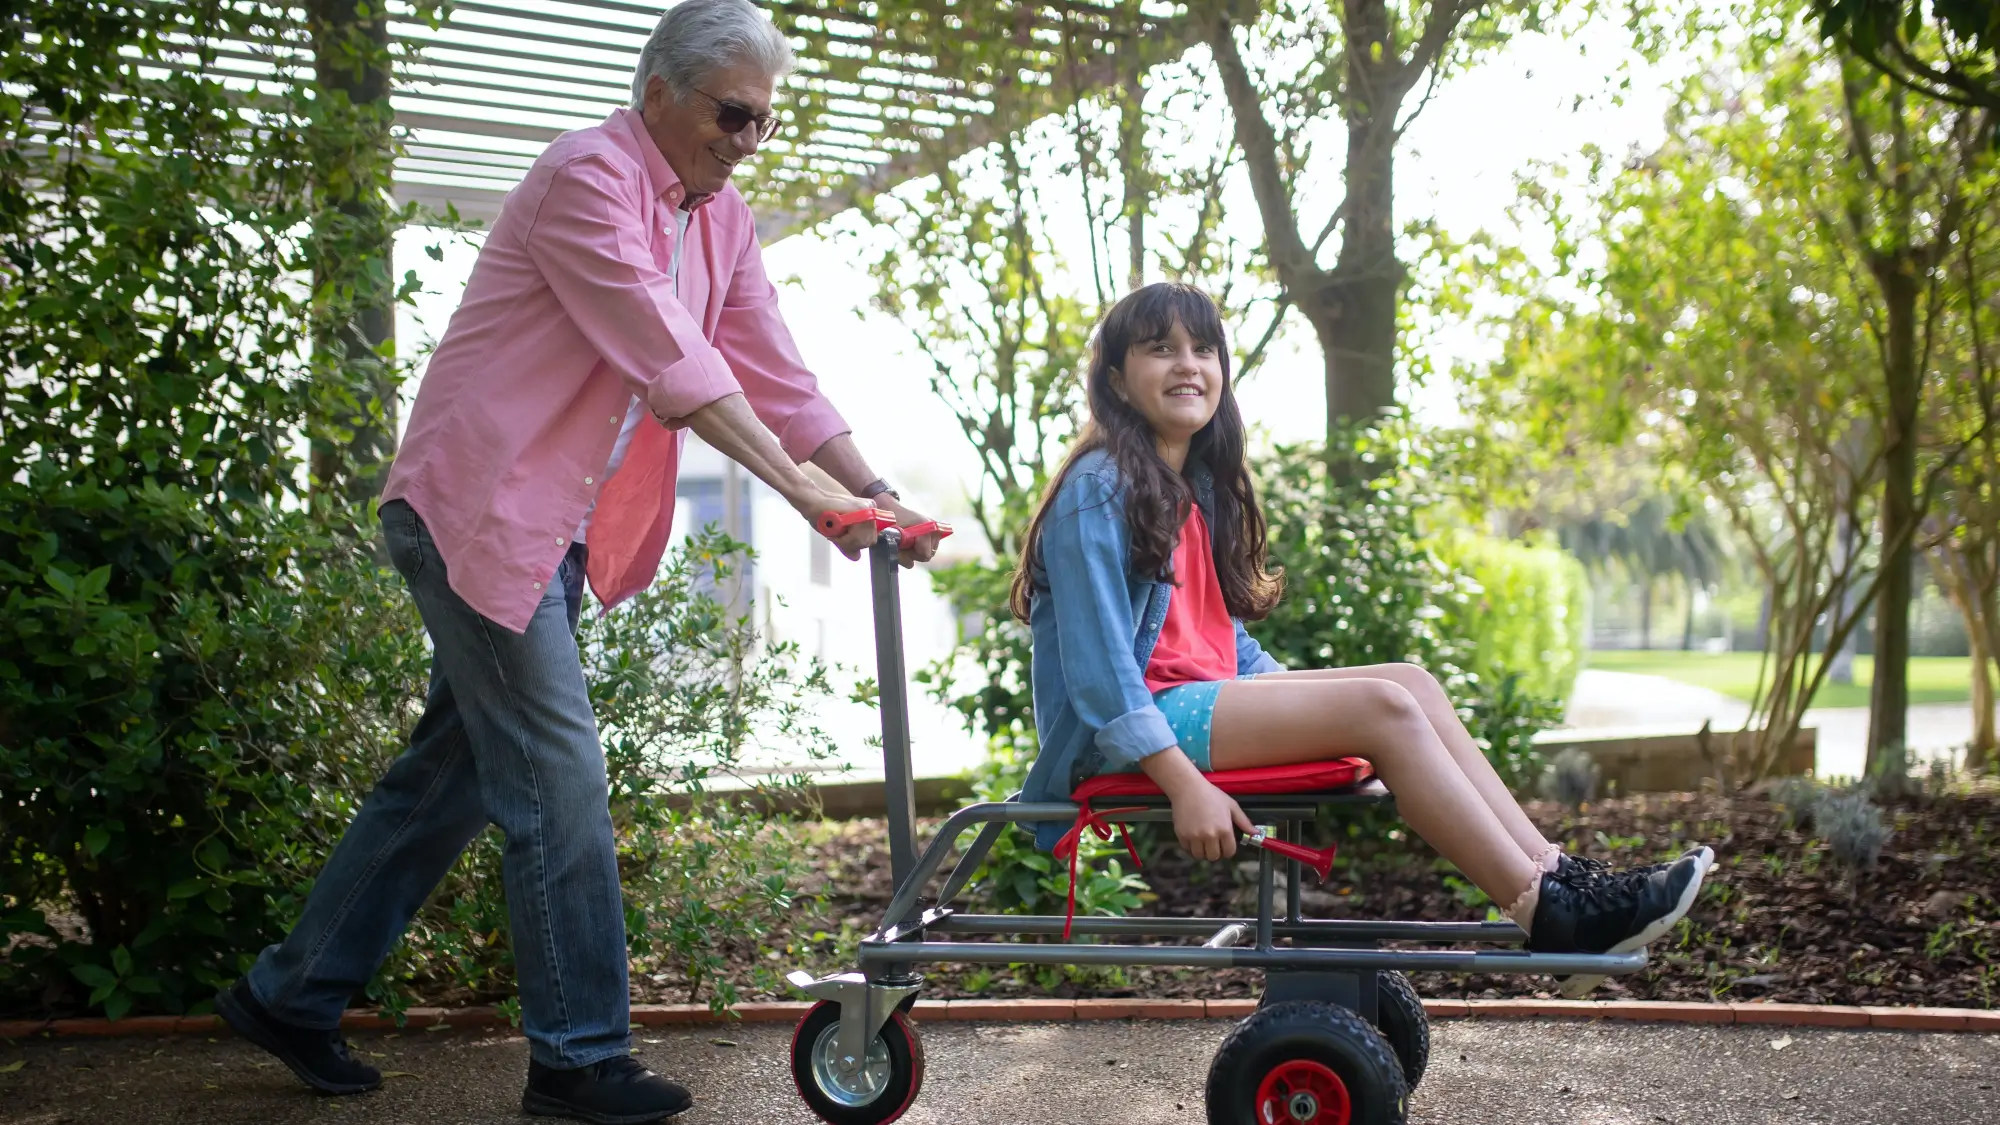 An Elderly Man Bonding with his Granddaughter at a Park